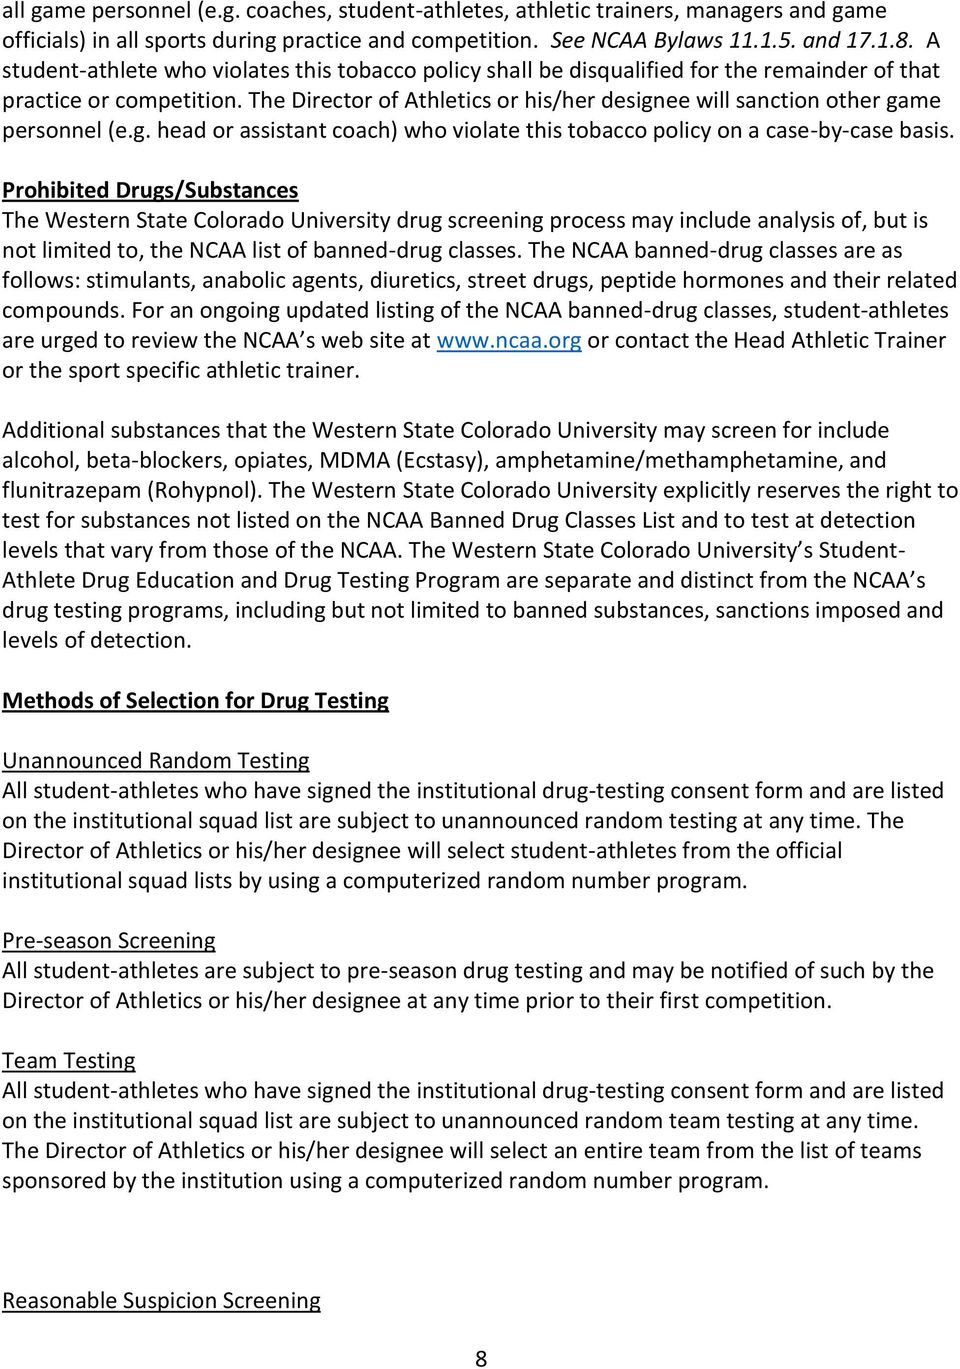 The Director of Athletics or his/her designee will sanction other game personnel (e.g. head or assistant coach) who violate this tobacco policy on a case-by-case basis.